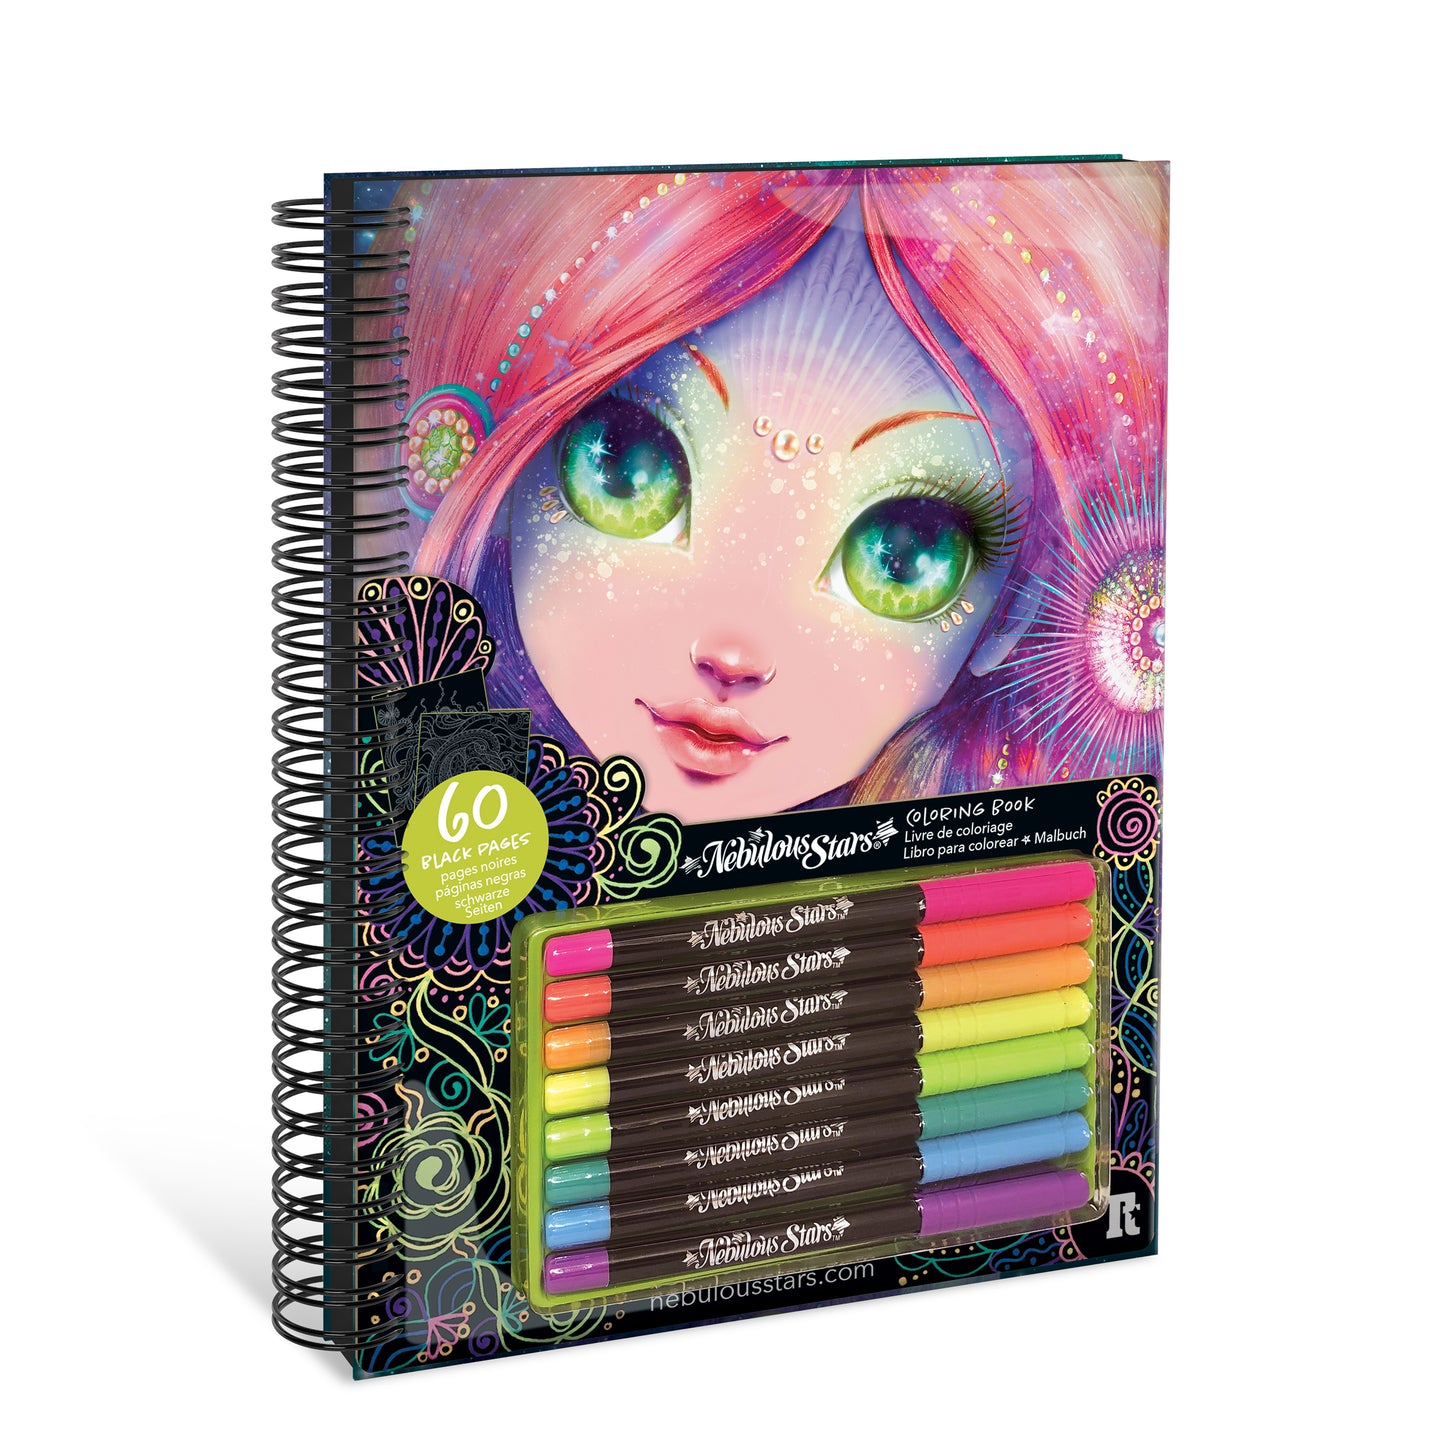 Nebulous Stars Black Pages Coloring Book - Coralia